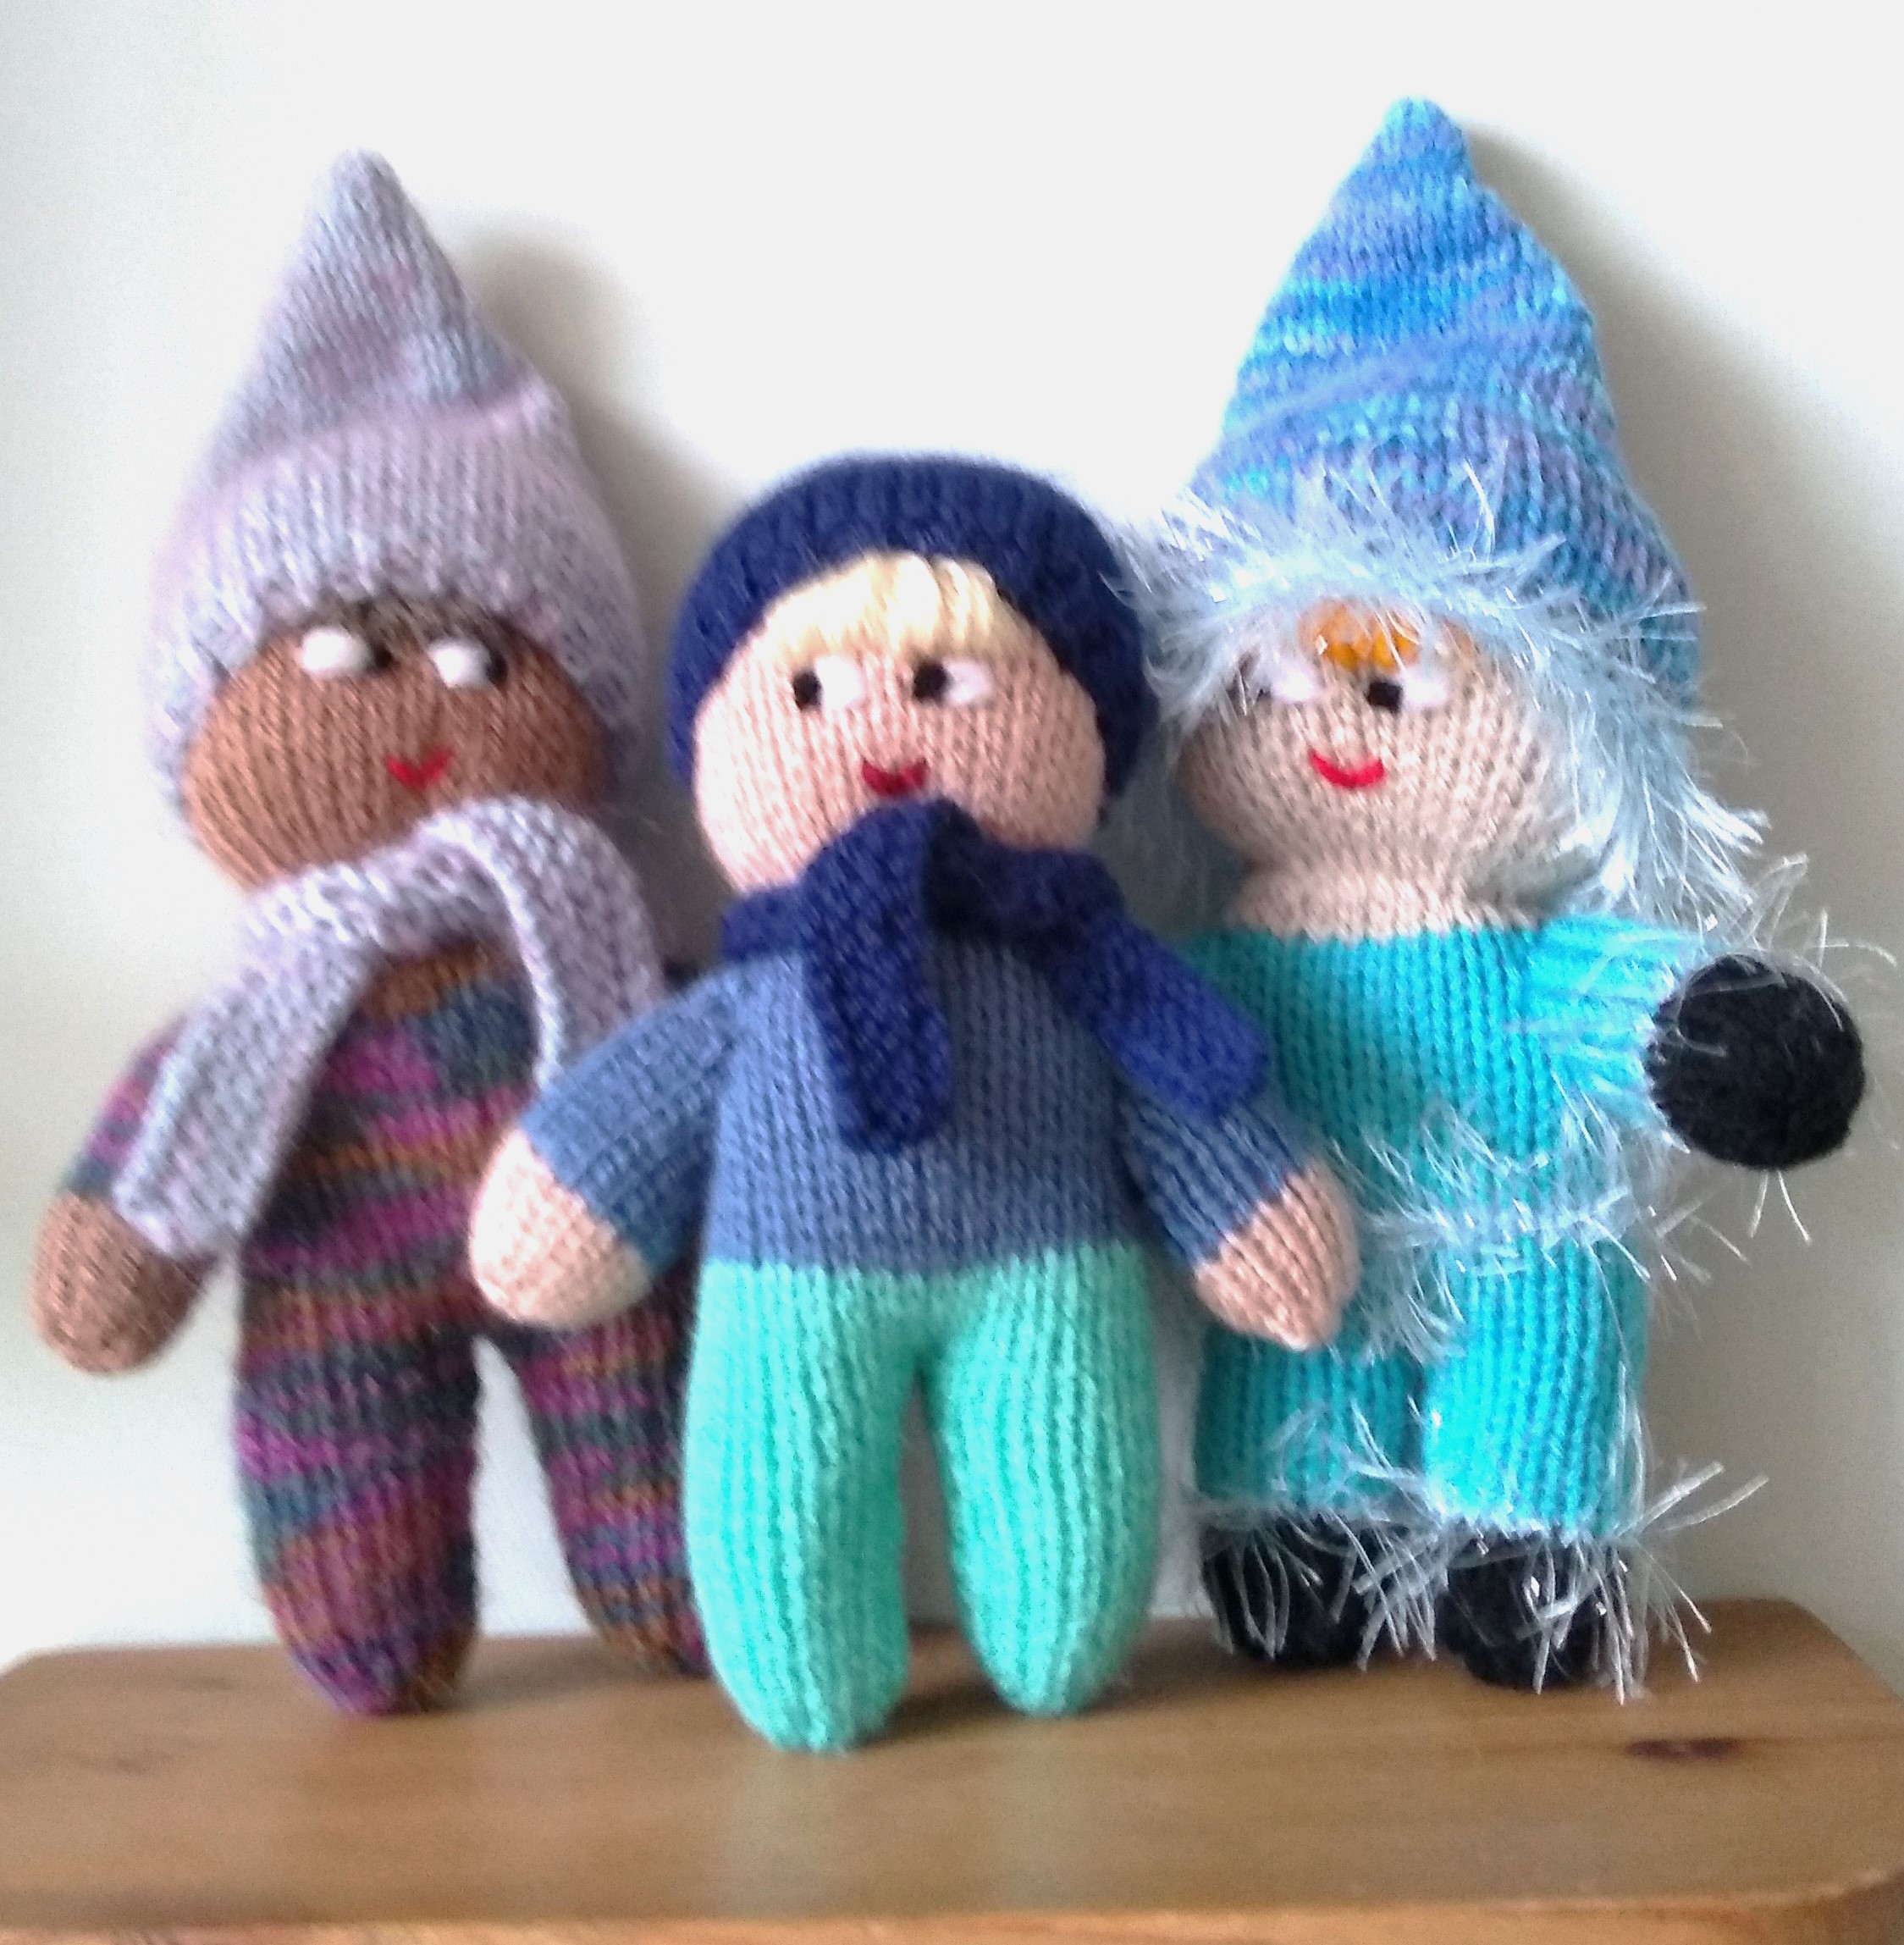 Three knitted mascots standing on a shelf.